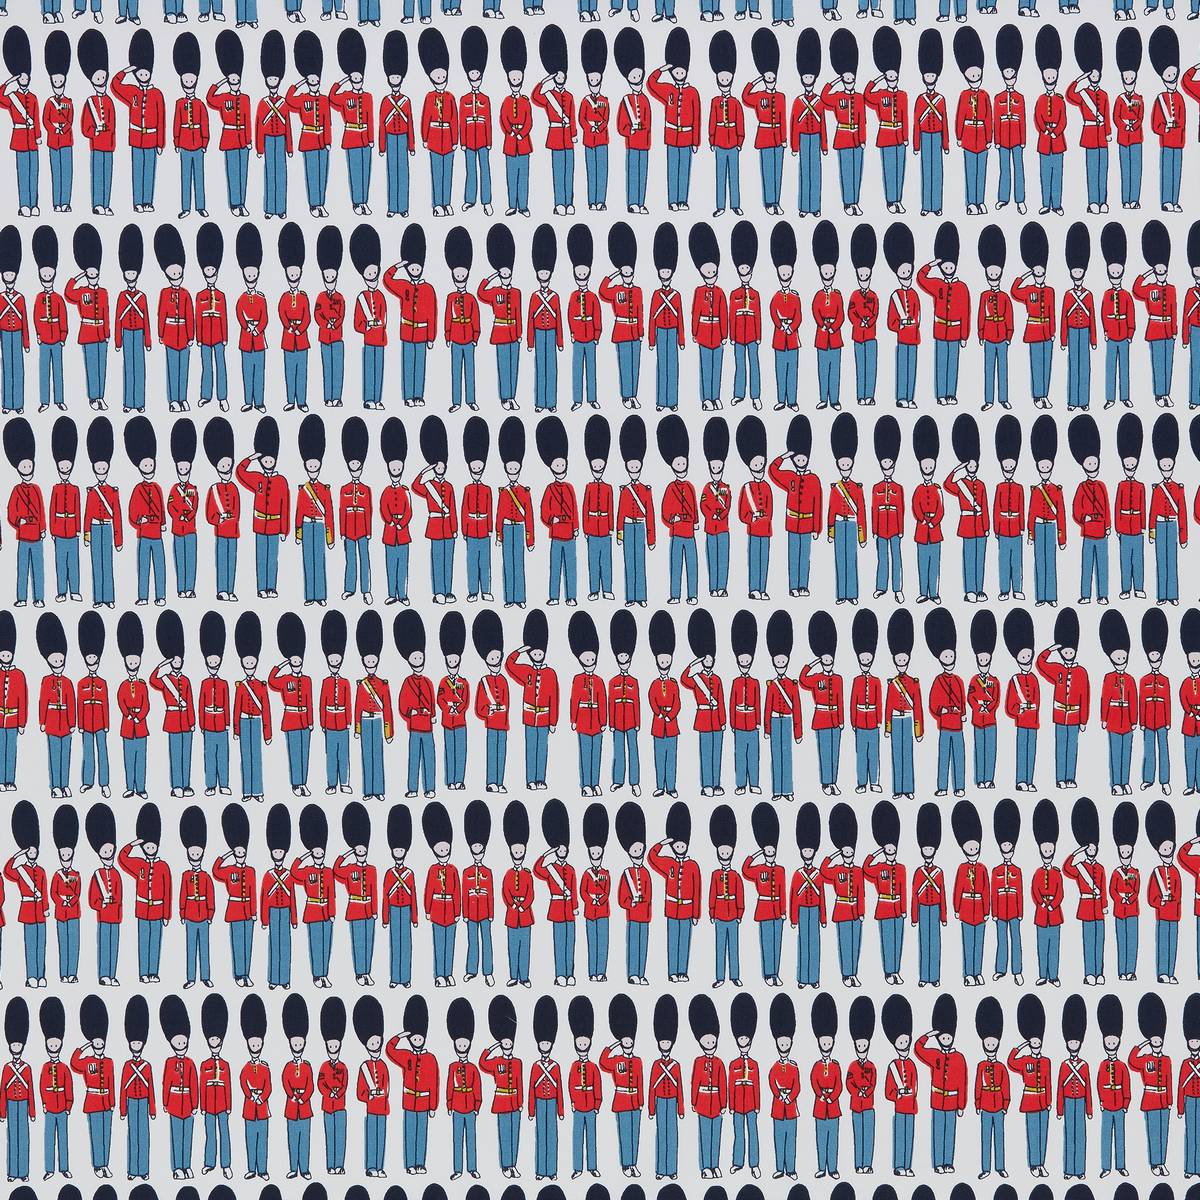 London Guards Multi Fabric by Cath Kidston